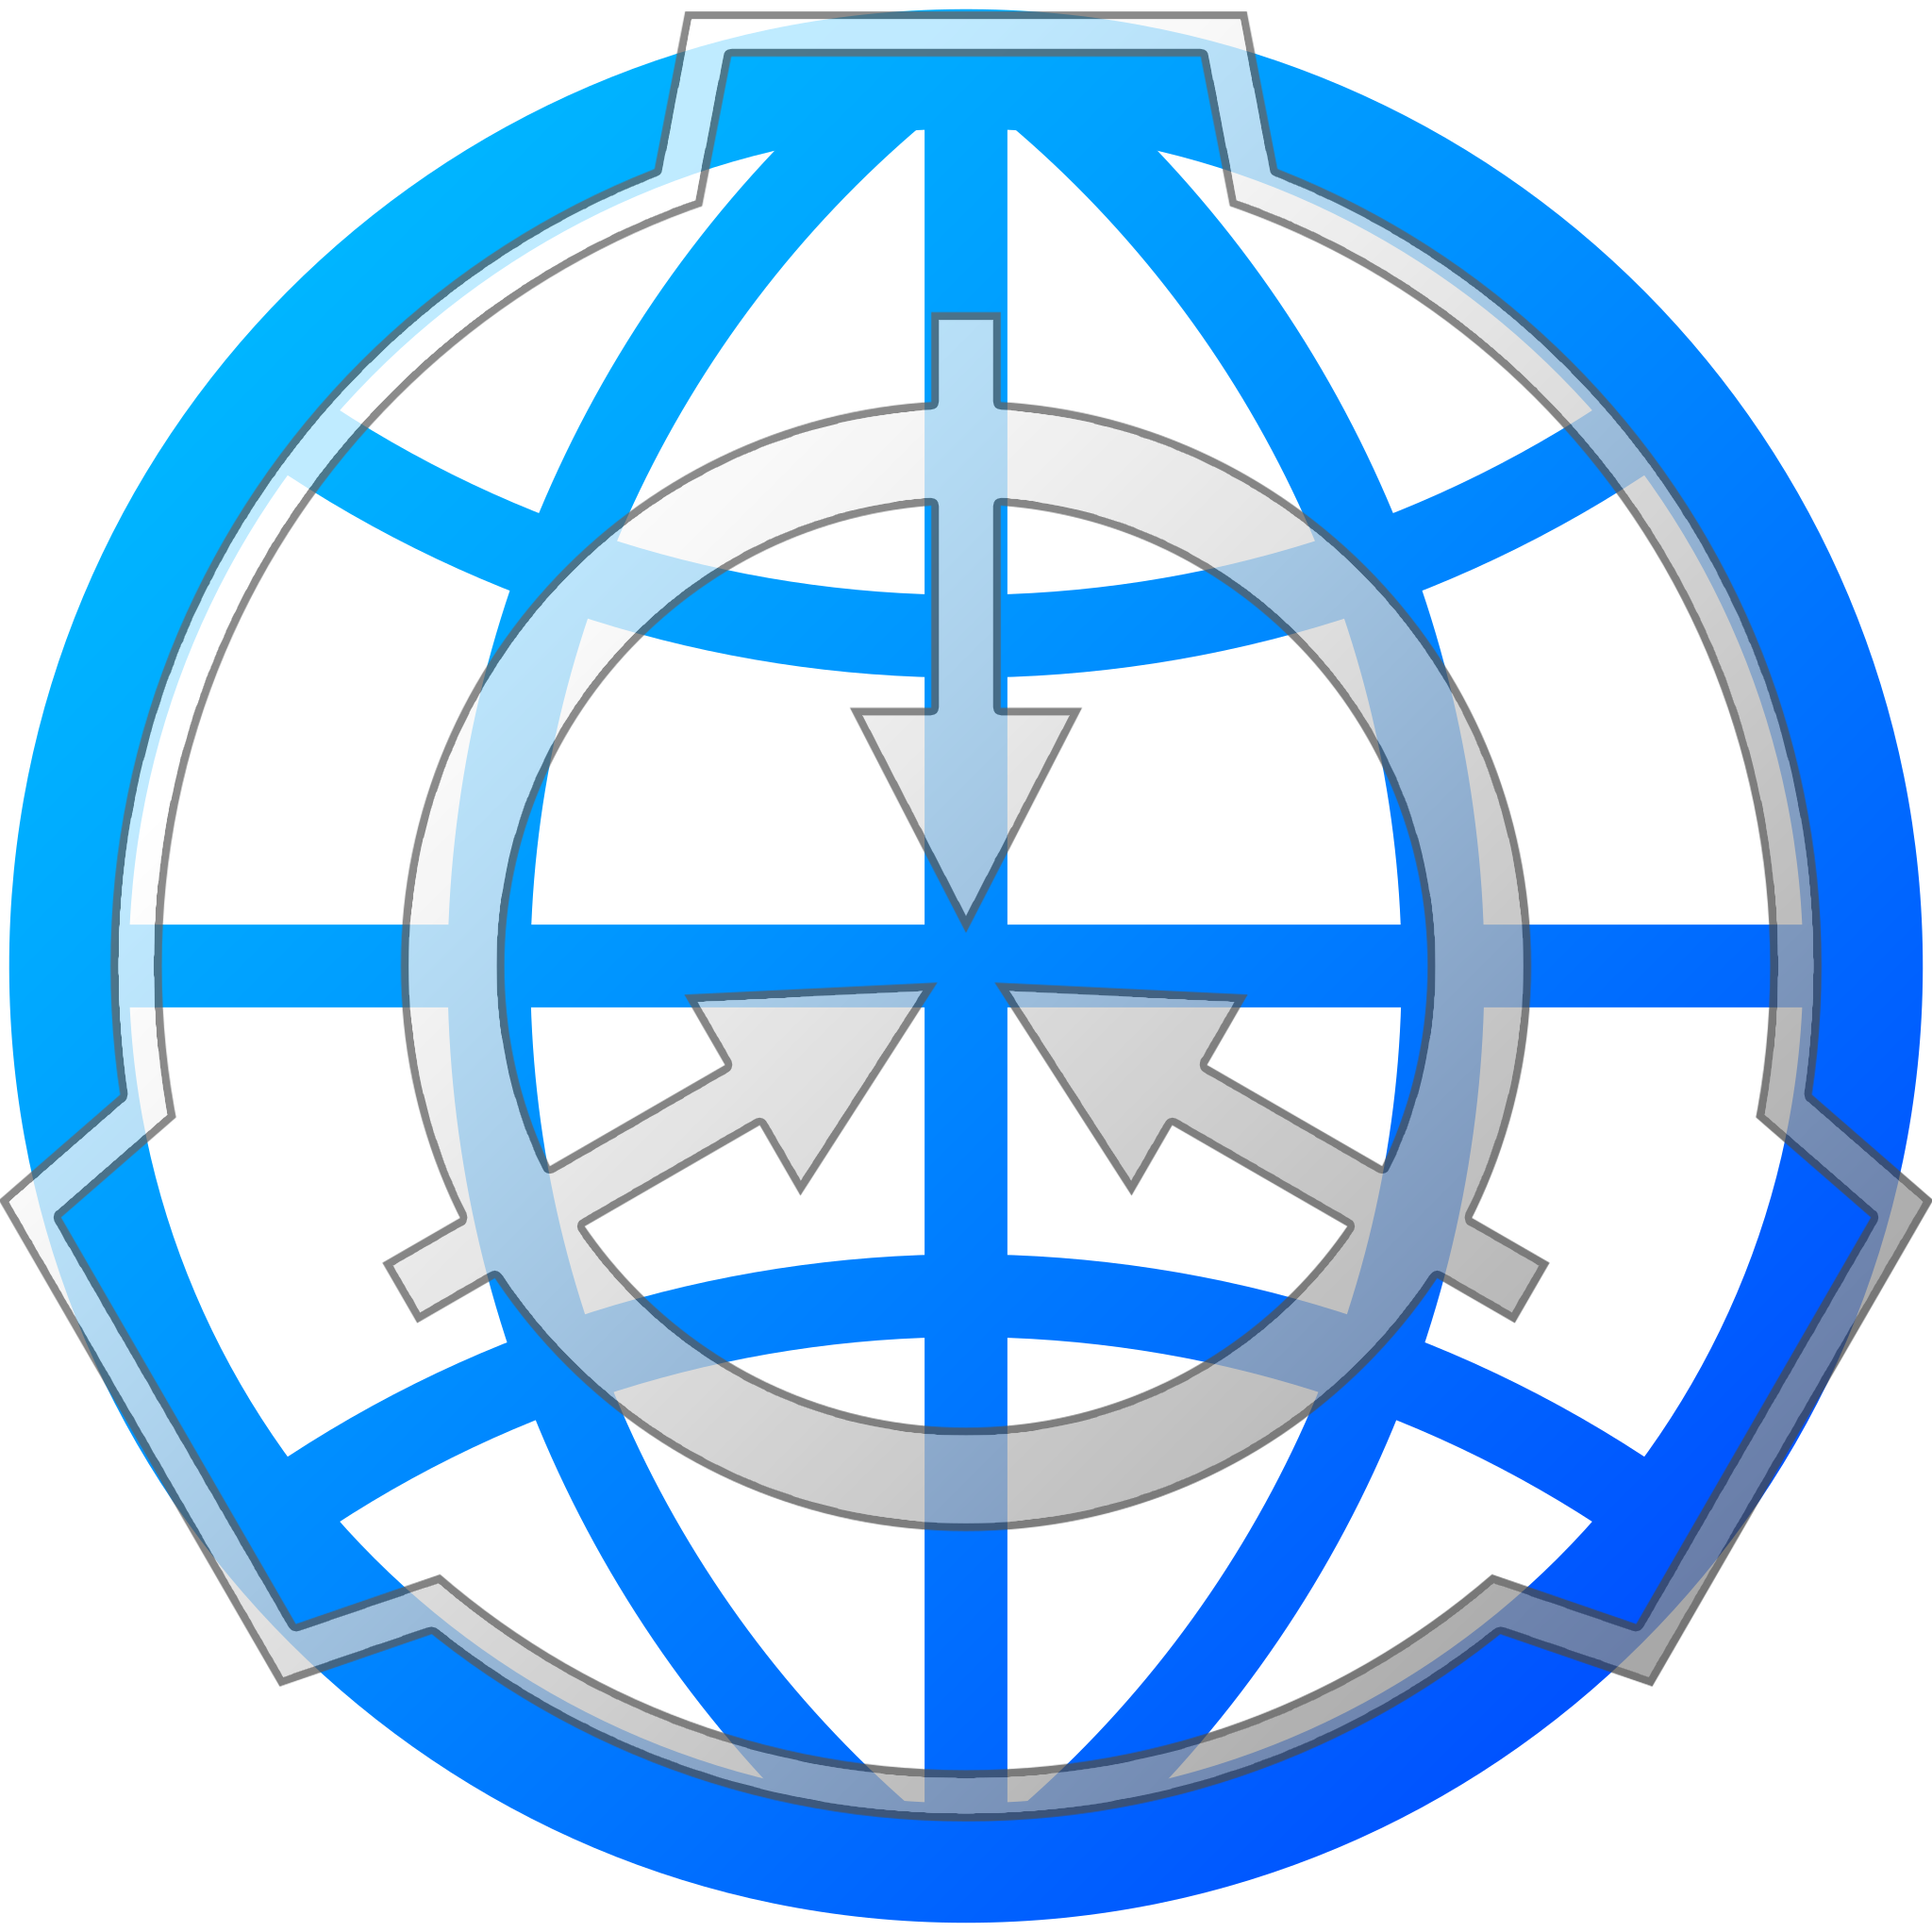 SCP Foundation Emblem with a wireframe of a globe overlayed